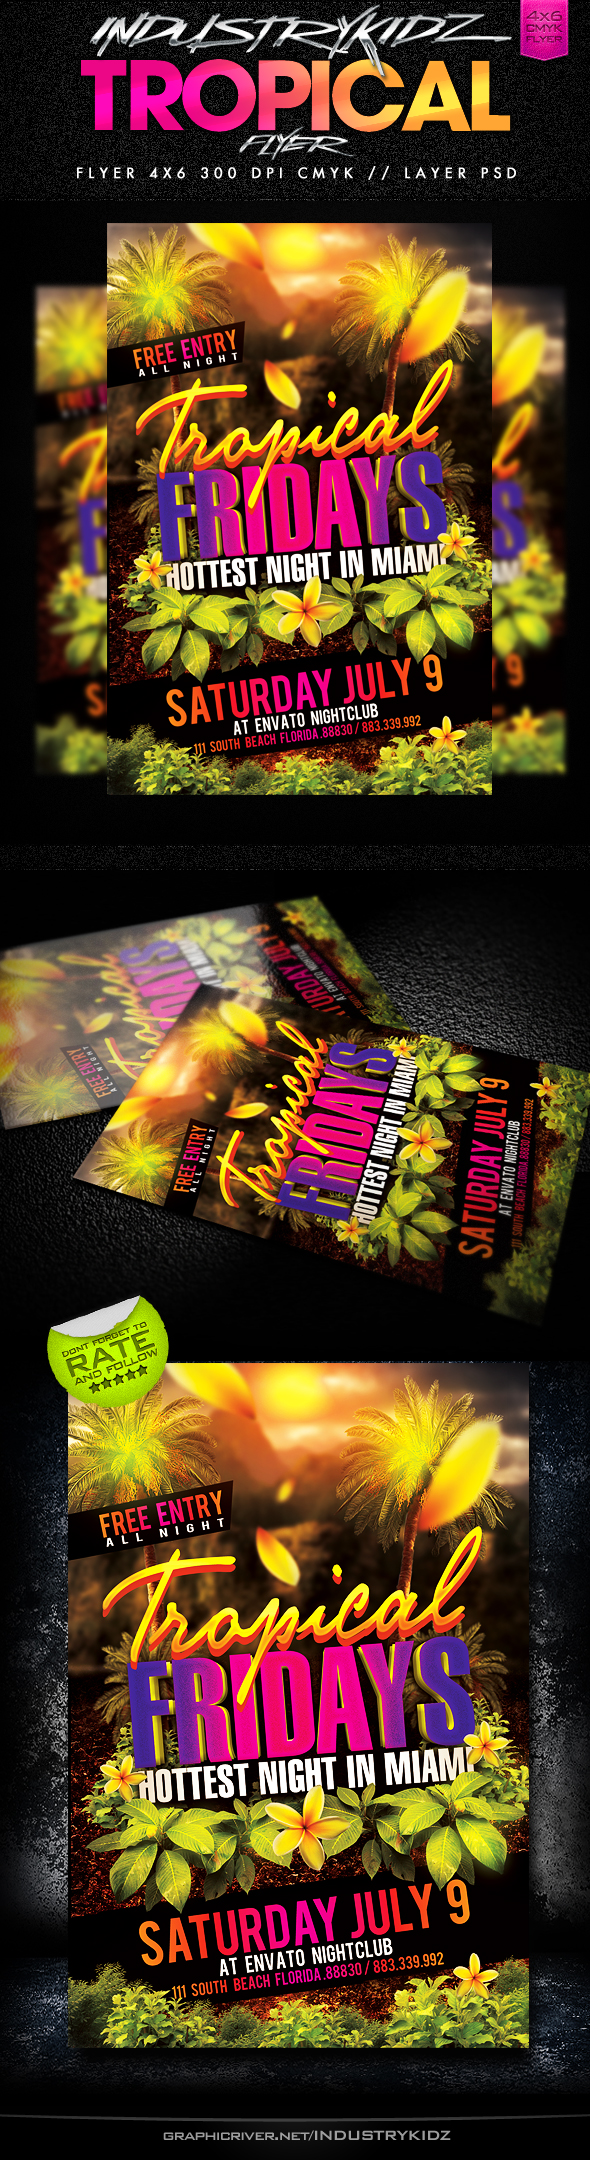 Download Tropical Fridays PSD FLYER by Industrykidz on Dribbble